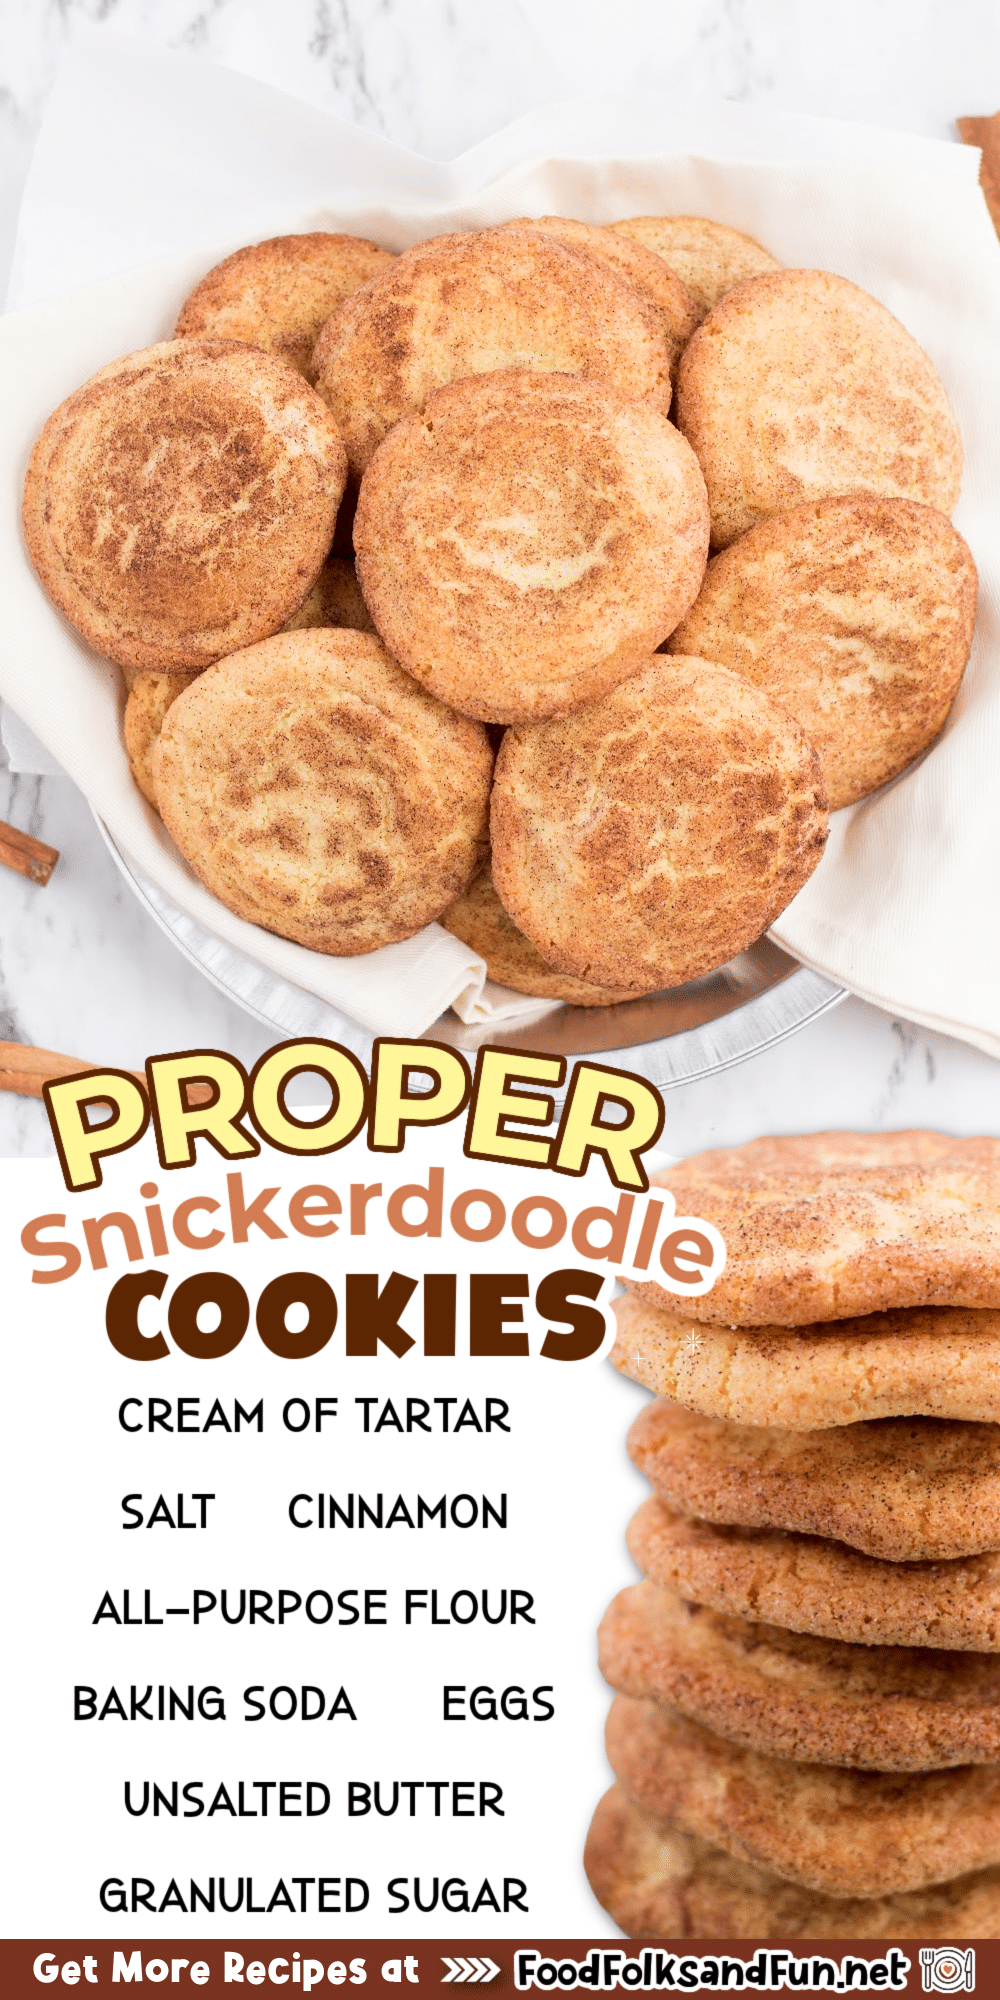 These chewy and tangy Snickerdoodle cookies have a light texture and are covered with glistening cinnamon sugar.  via @foodfolksandfun